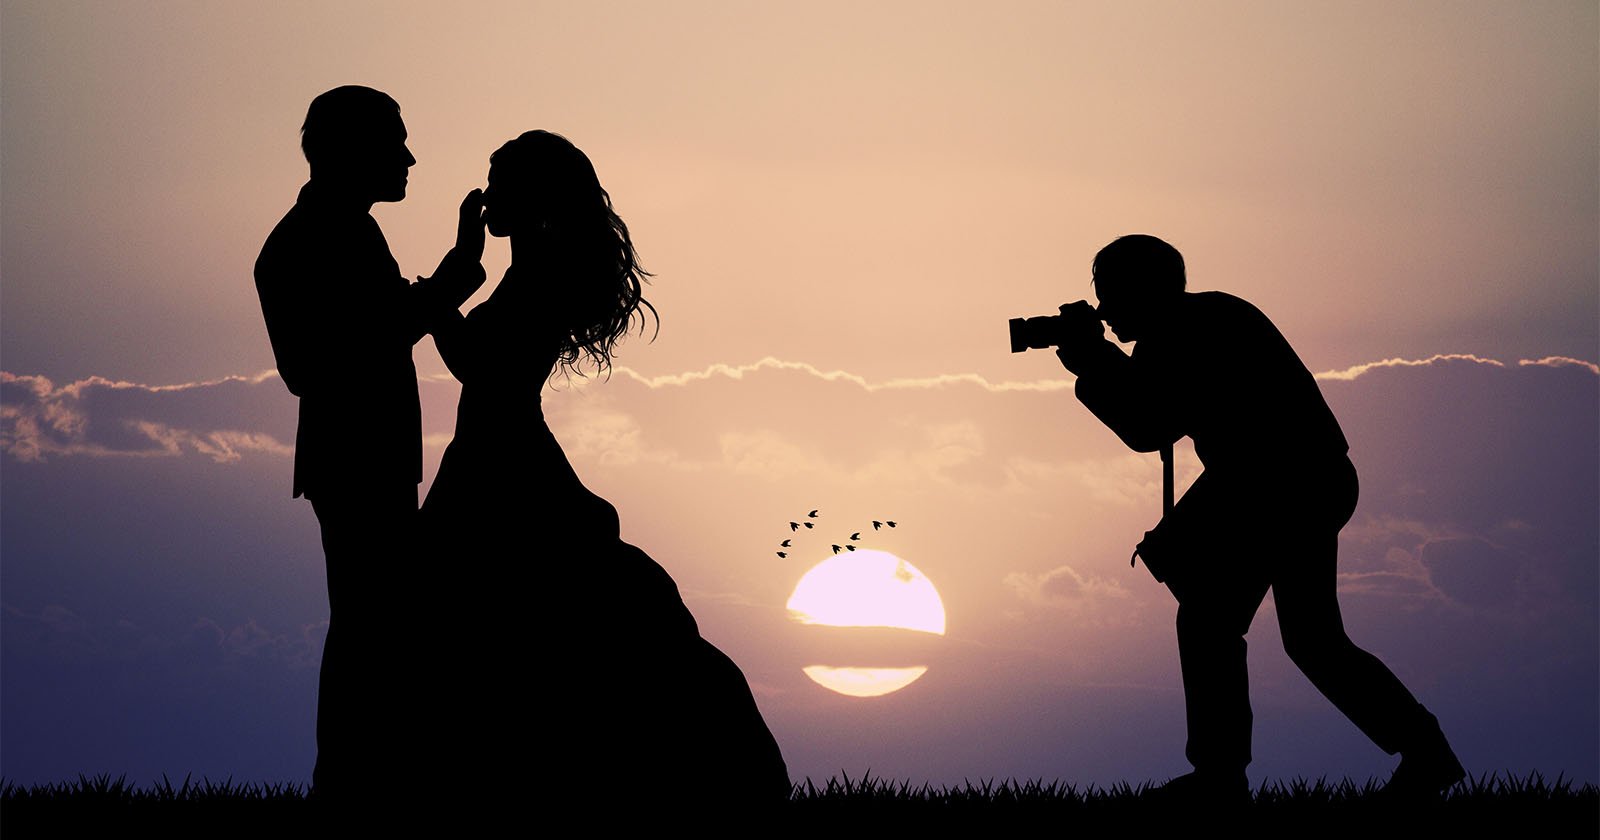 The Top 100 Wedding Photographers in the US, According to Yelp